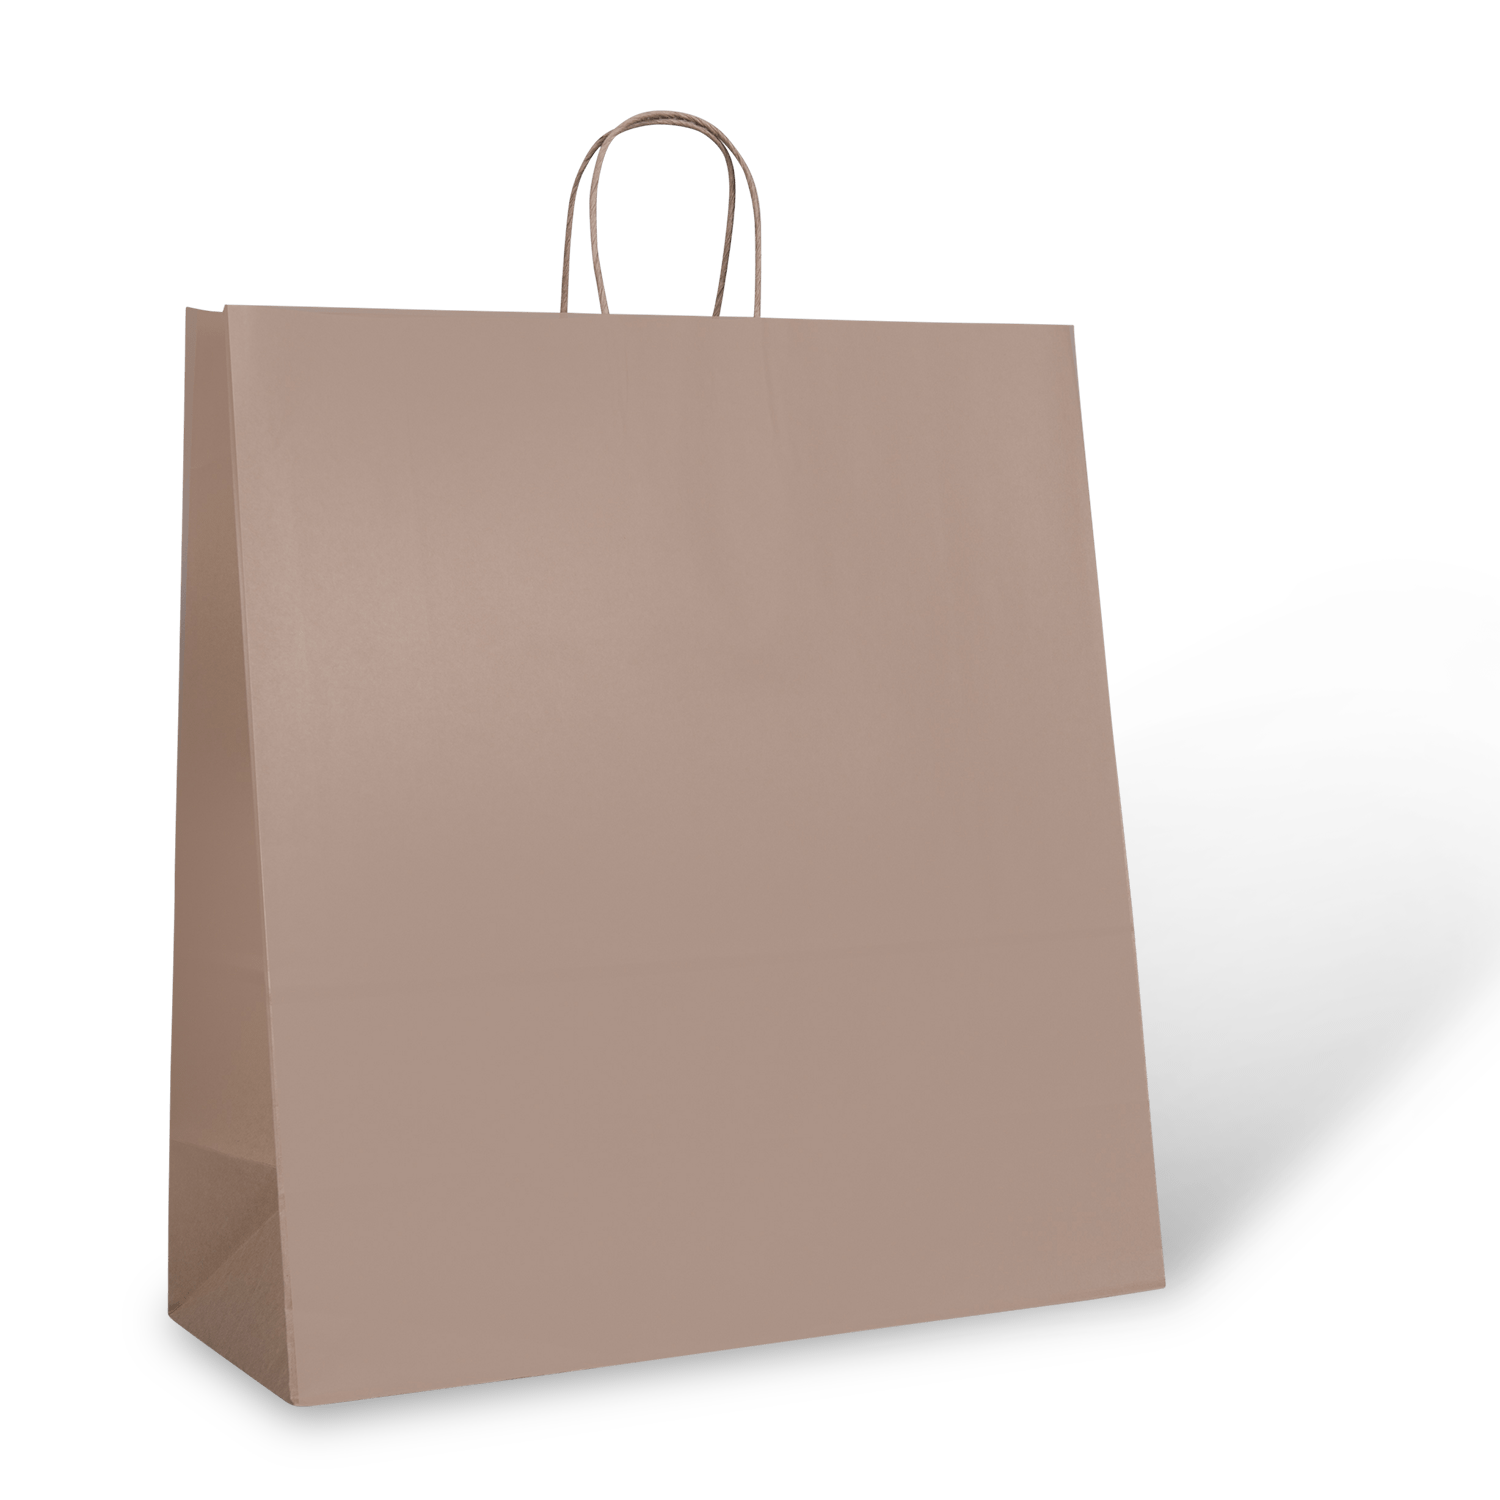 Image of an open paper bag